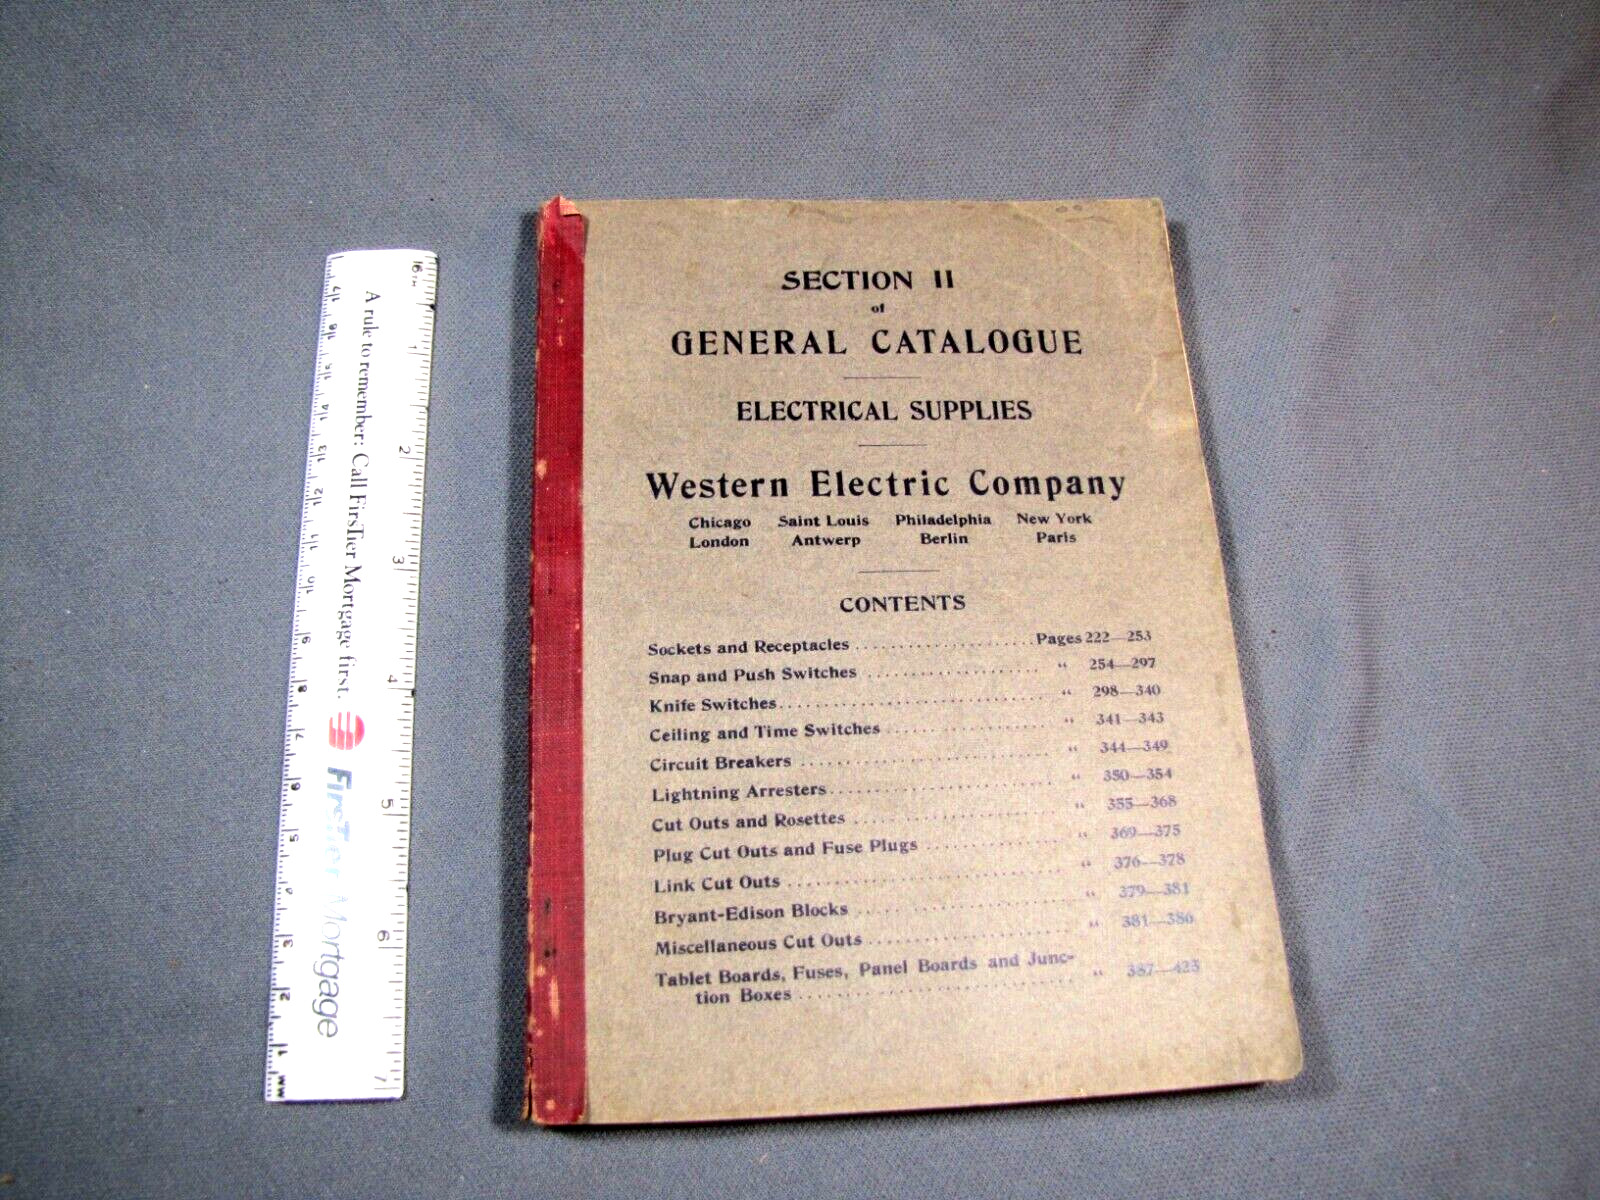 Rare Early Western Electric Co Electrical Supply Section 11 of General Catalogue